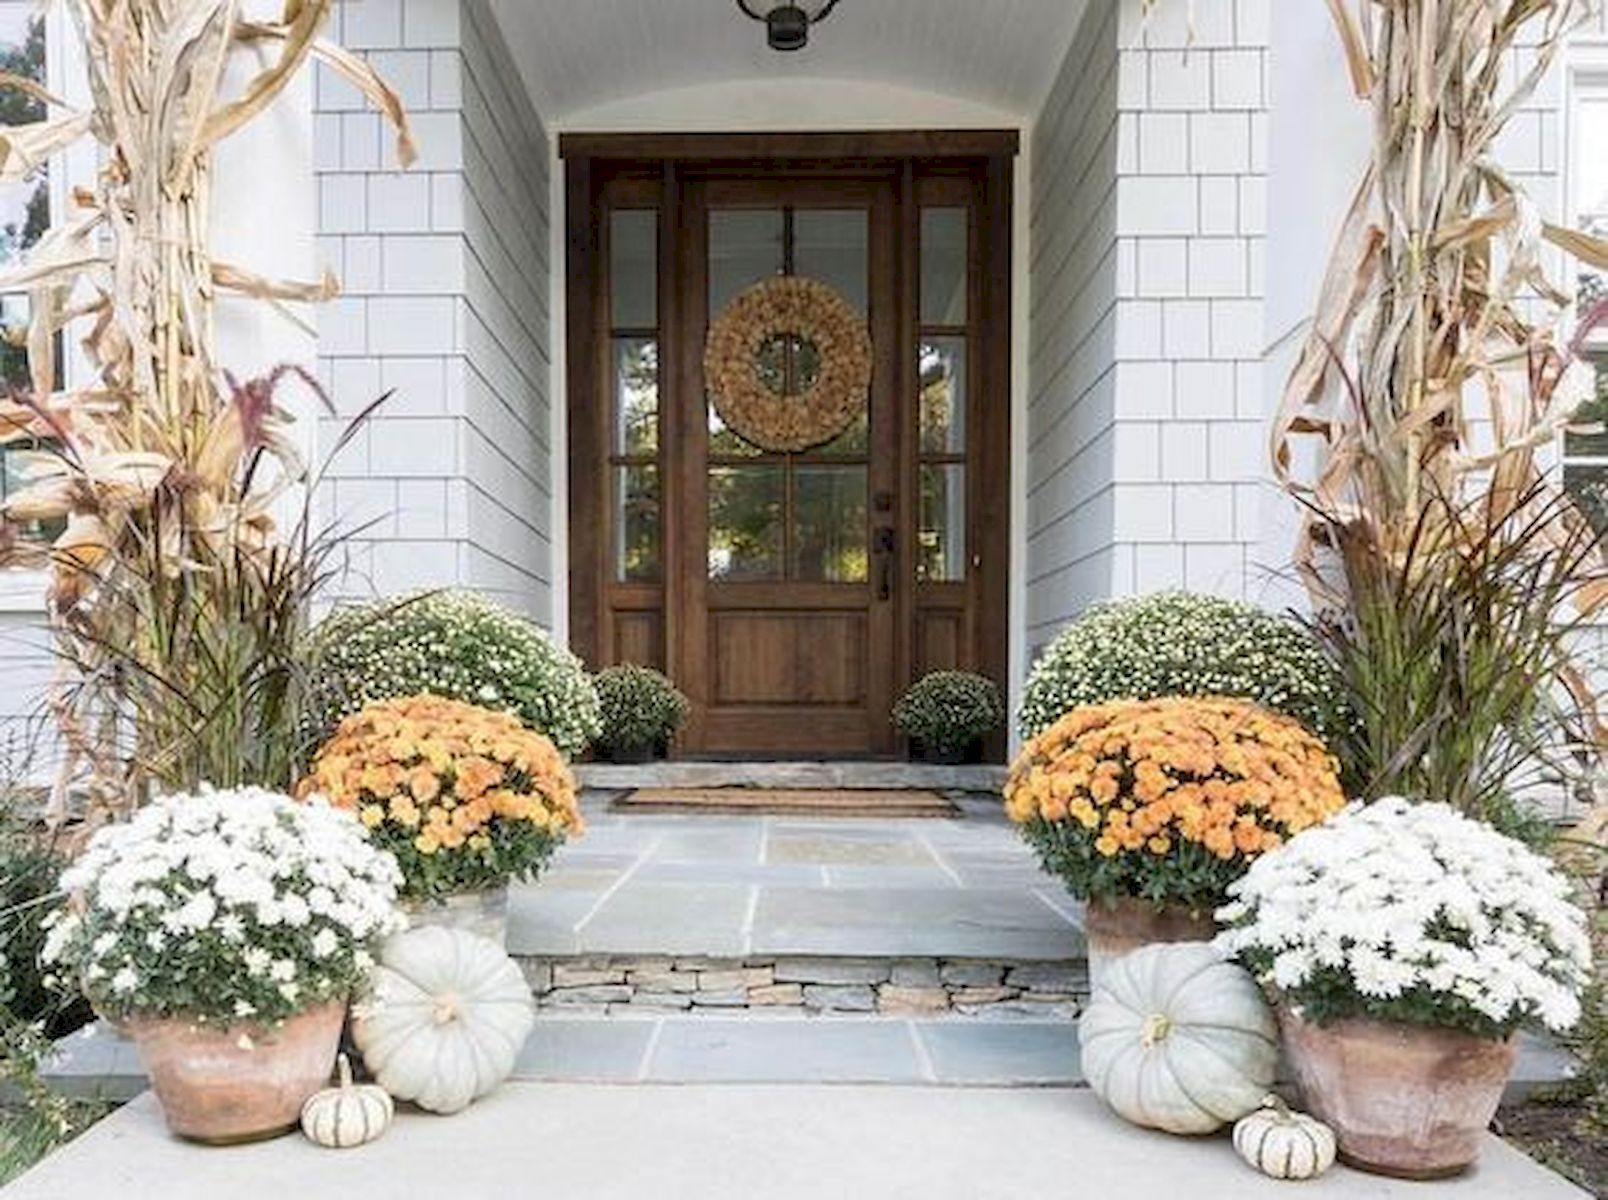 40 Beautiful Fall Front Porch Decorating Ideas That Will Make Your Home Look Amazing (1)